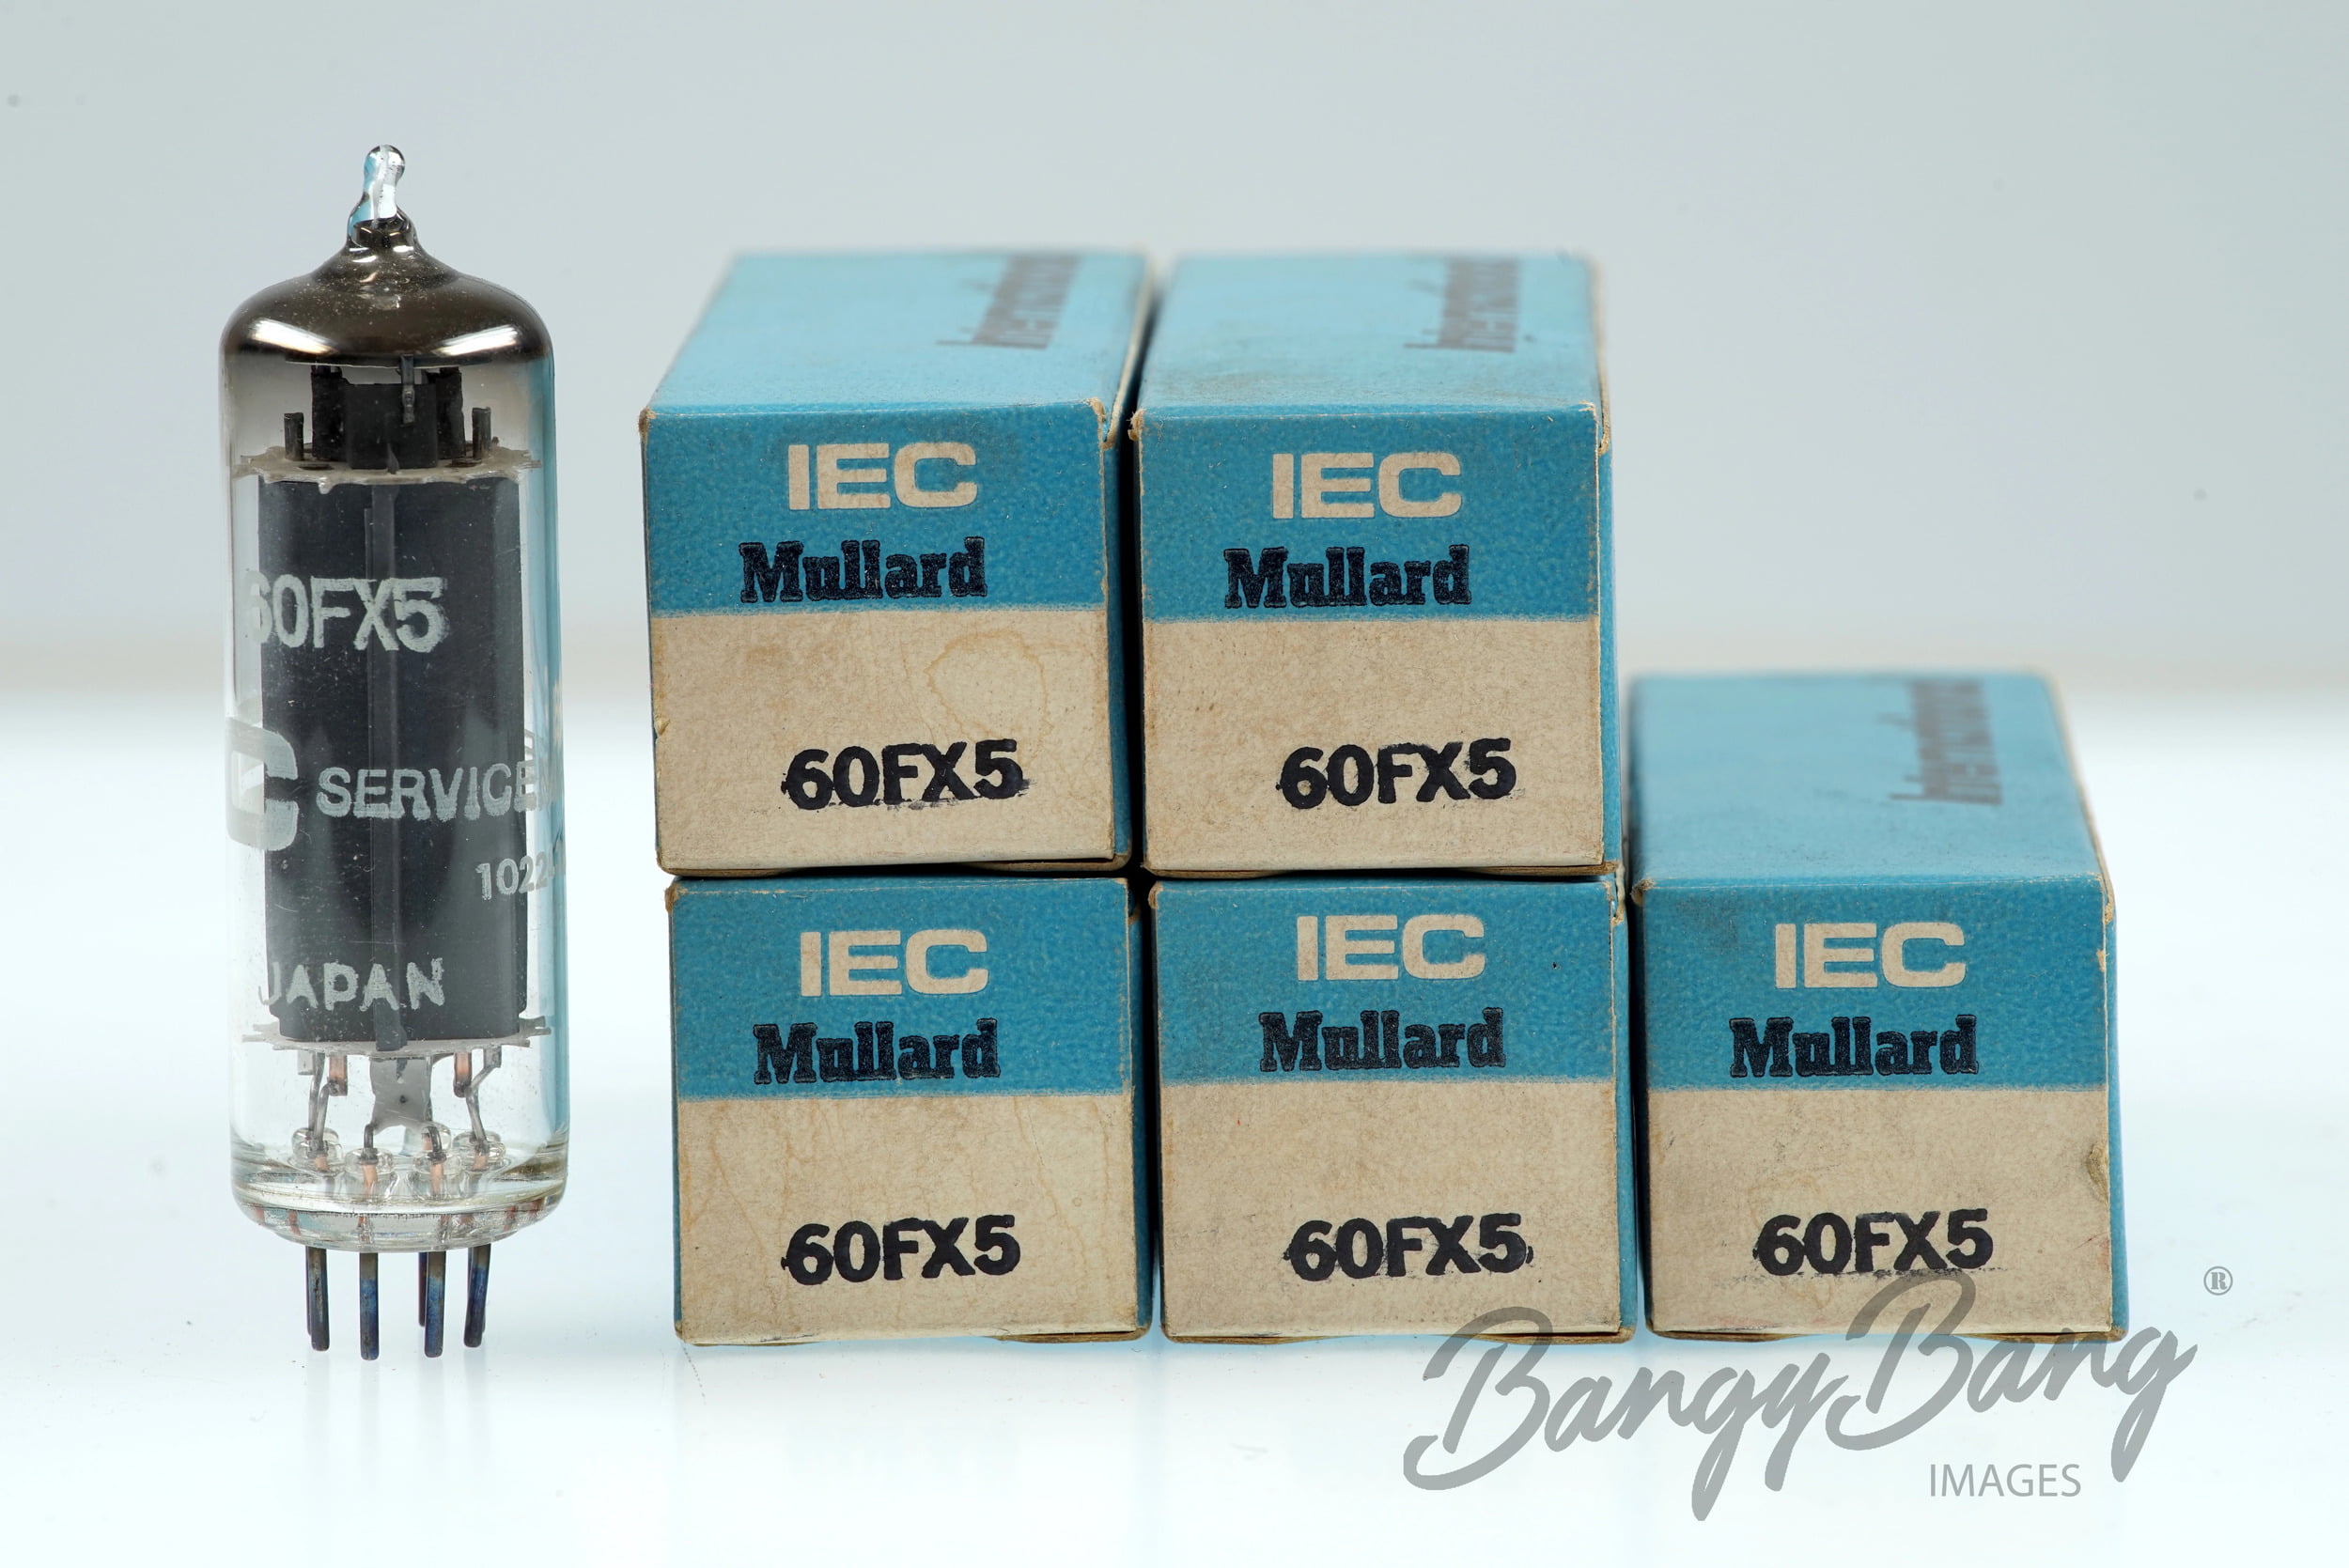 NEW IN BOX CEi 60FX5 GUITAR PRACTICE AMPLIFIER AUDIO OUTPUT TUBE VALVE 